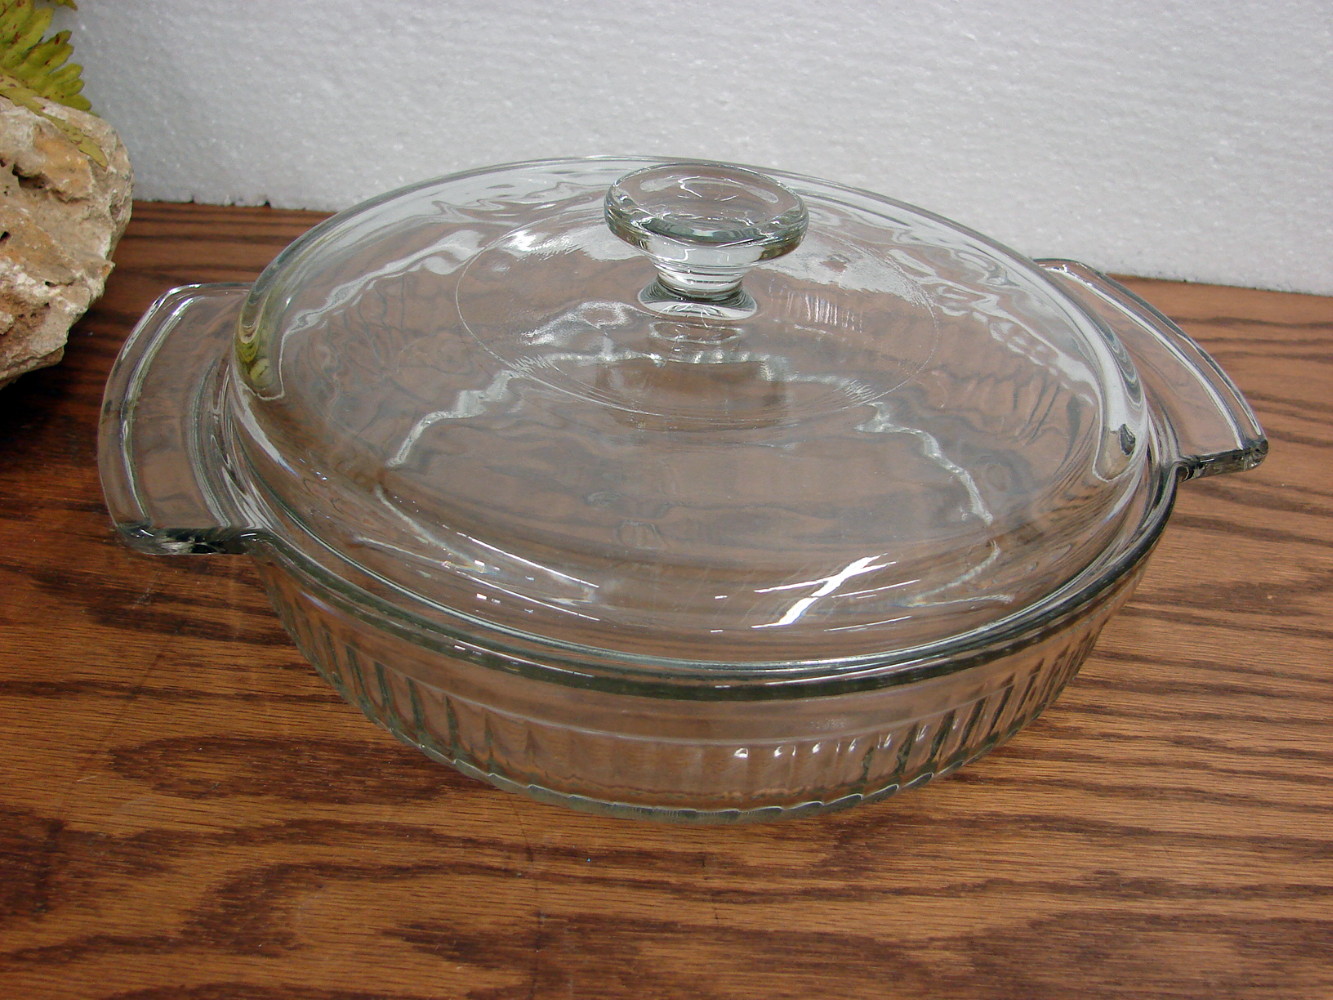 Vintage Casserole Dish With Lid Oval Ribbed Clear Casserole 